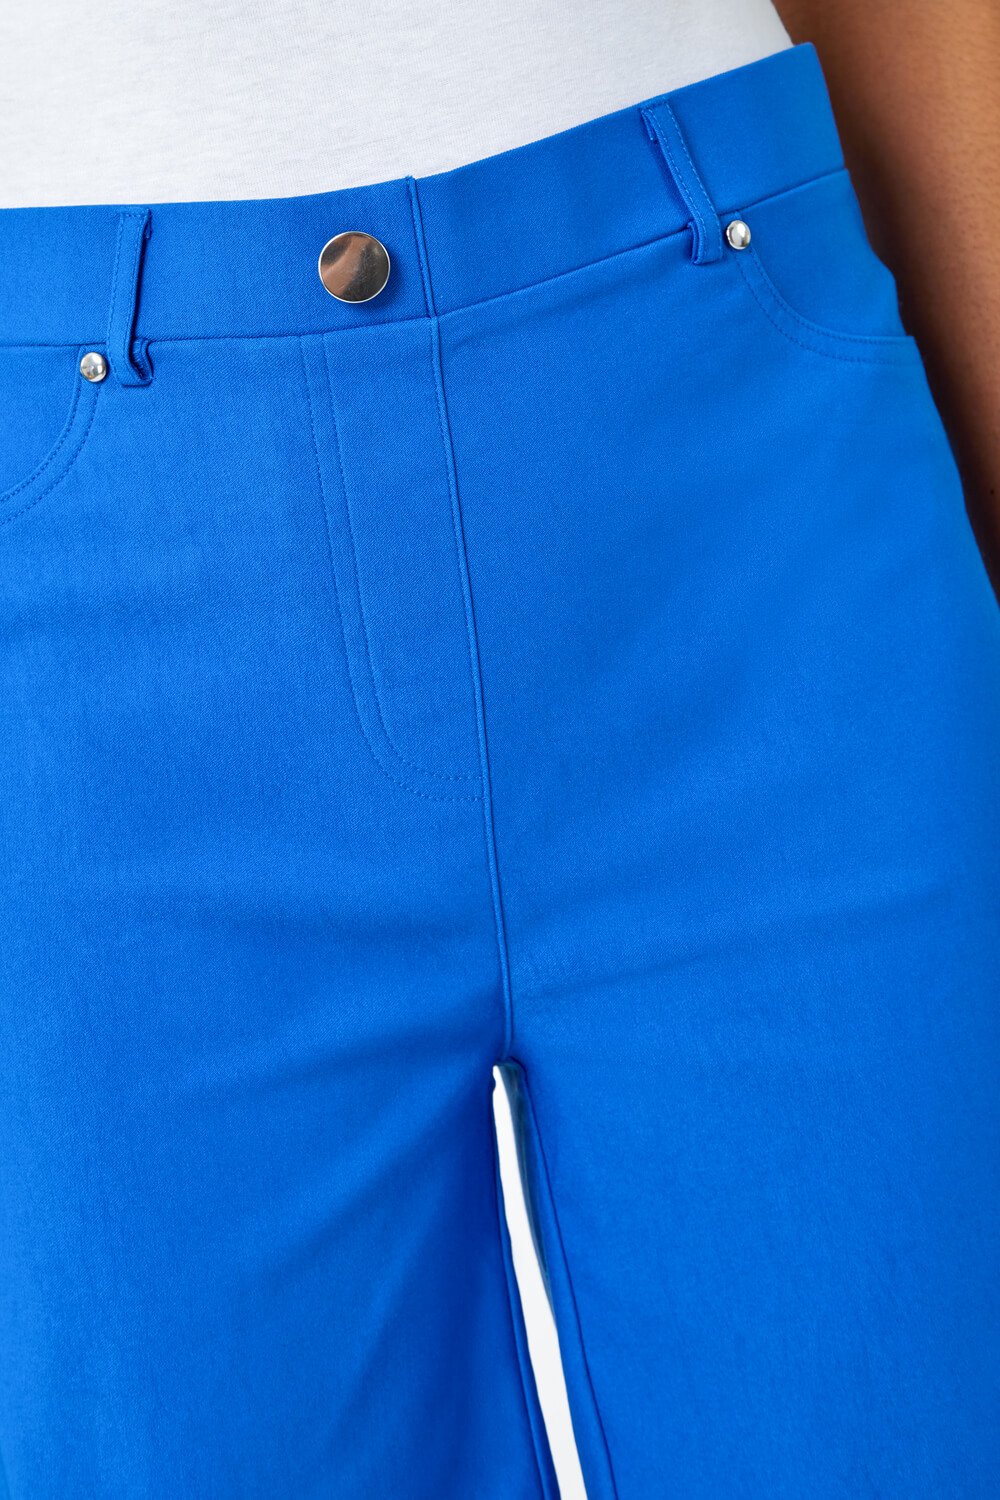 Bright Blue Turn Up Stretch Shorts, Image 4 of 5